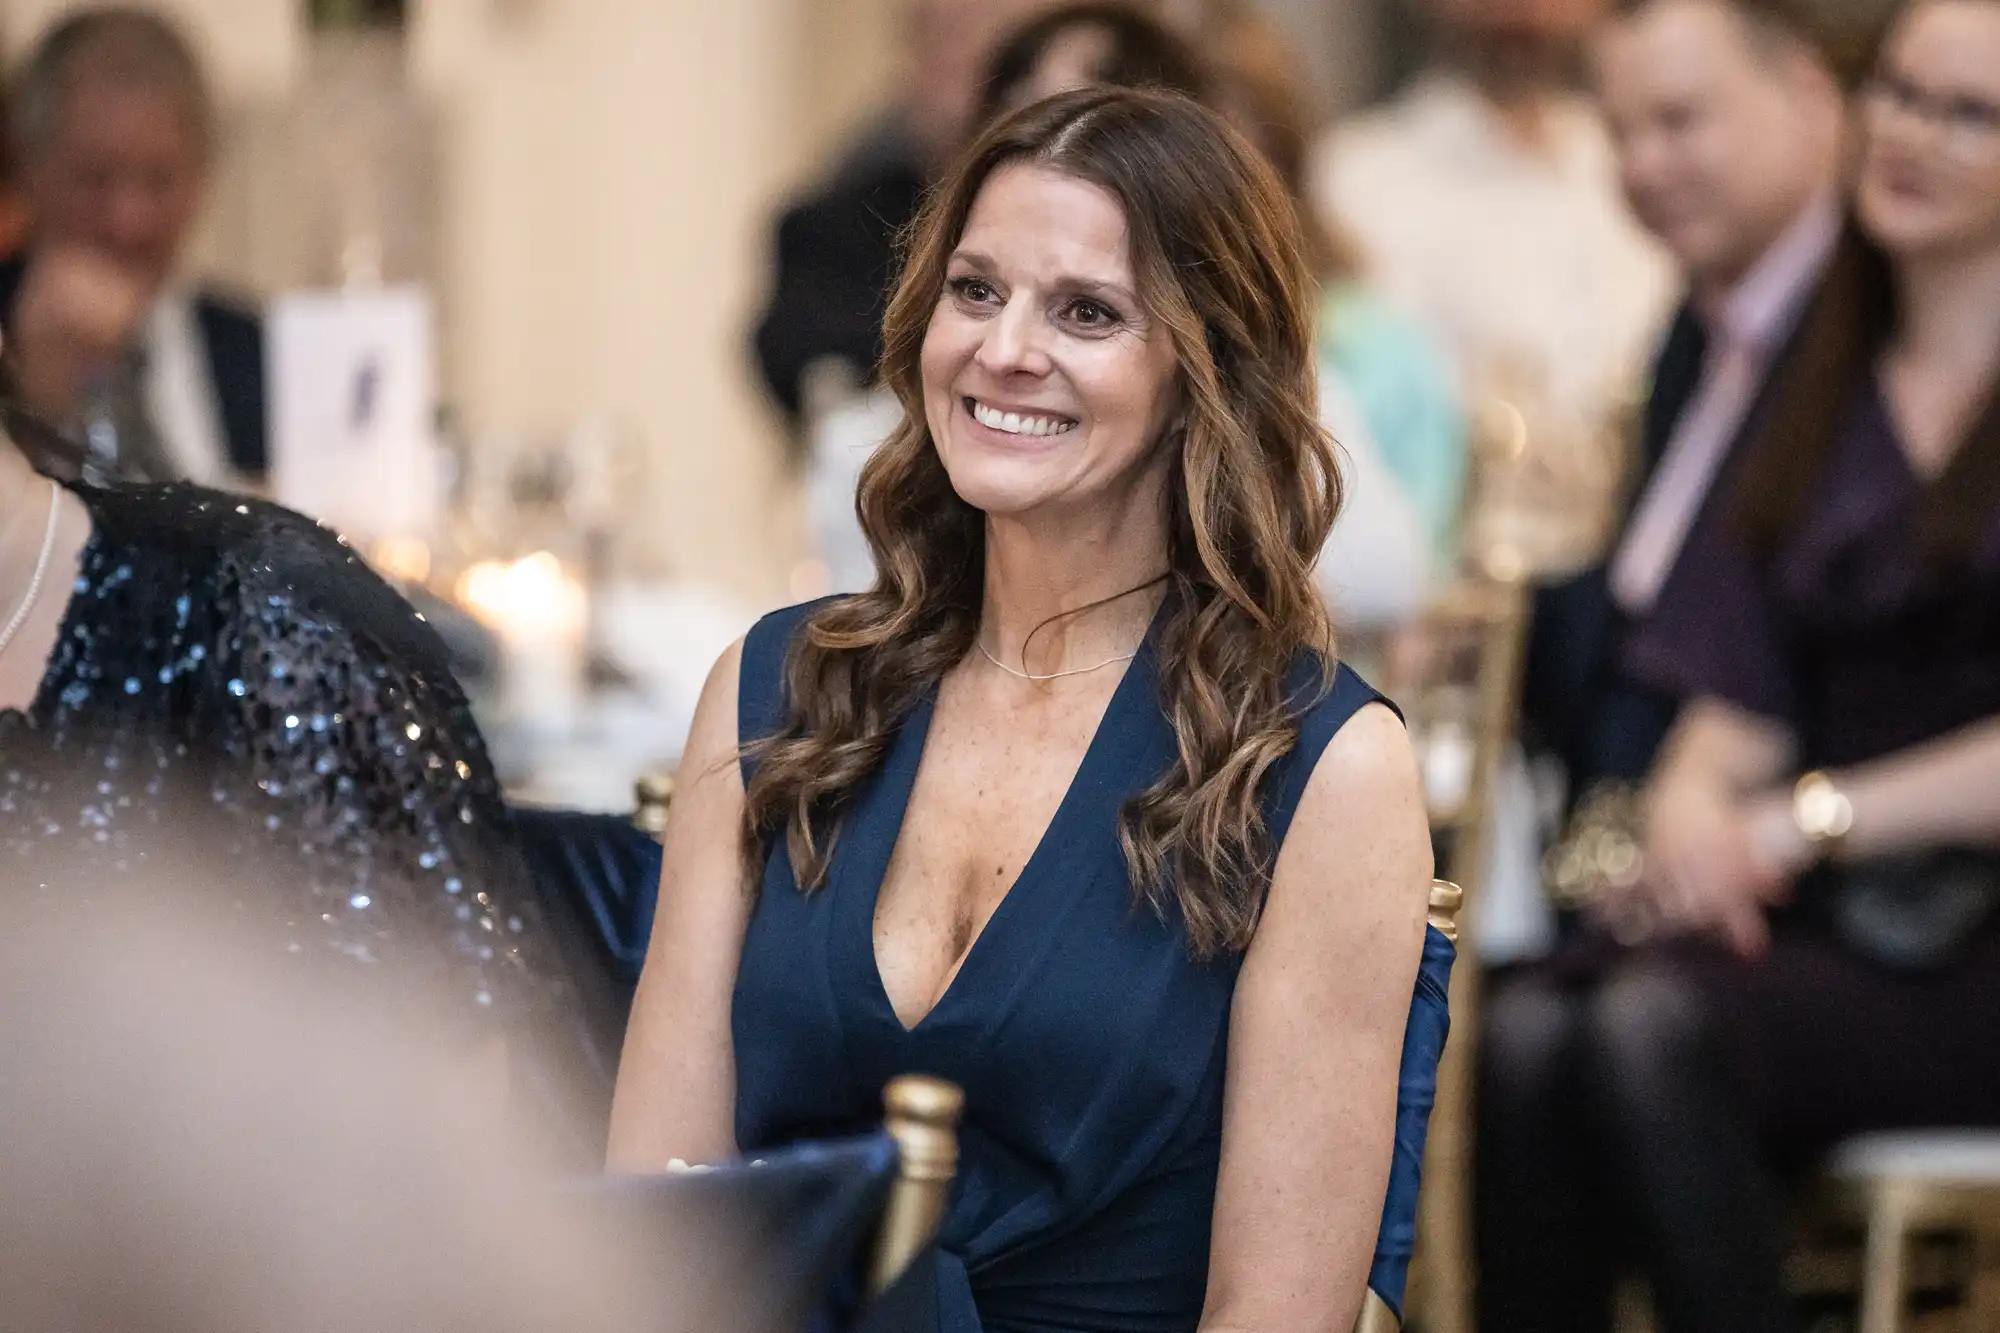 A woman with long brown hair wearing a dark blue dress smiles while seated at an indoor formal event.